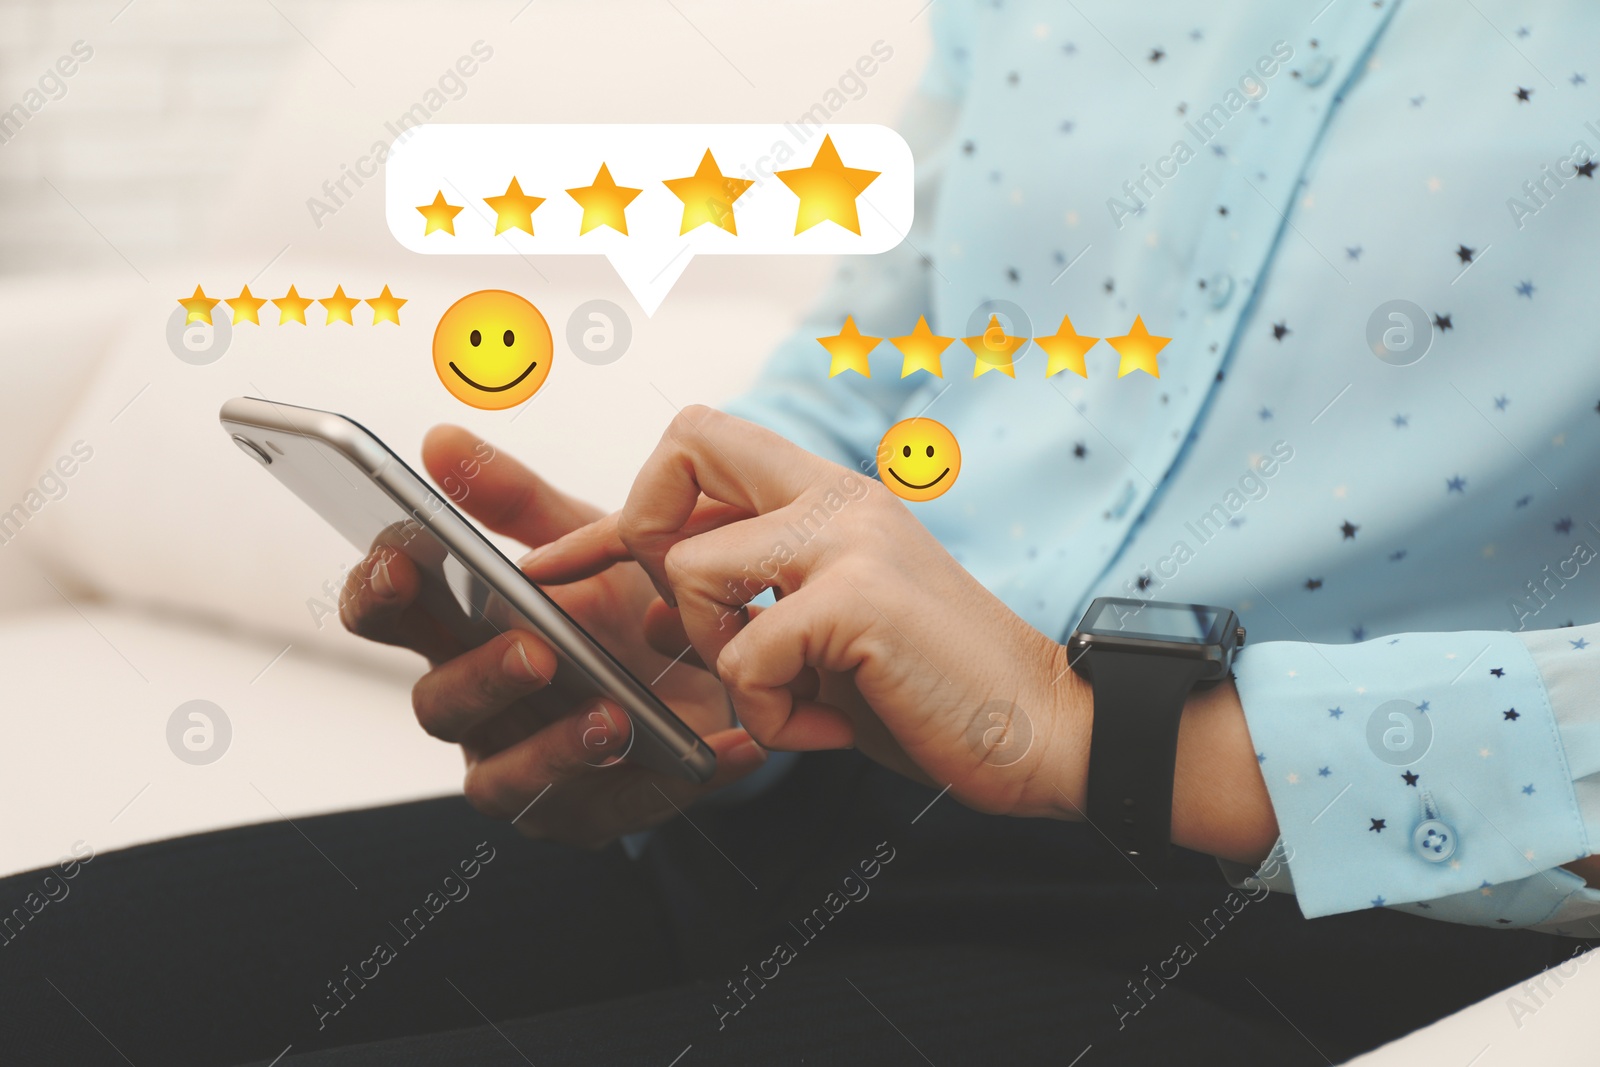 Image of Woman leaving service feedback with smartphone at home, closeup. Stars and emoticons over device